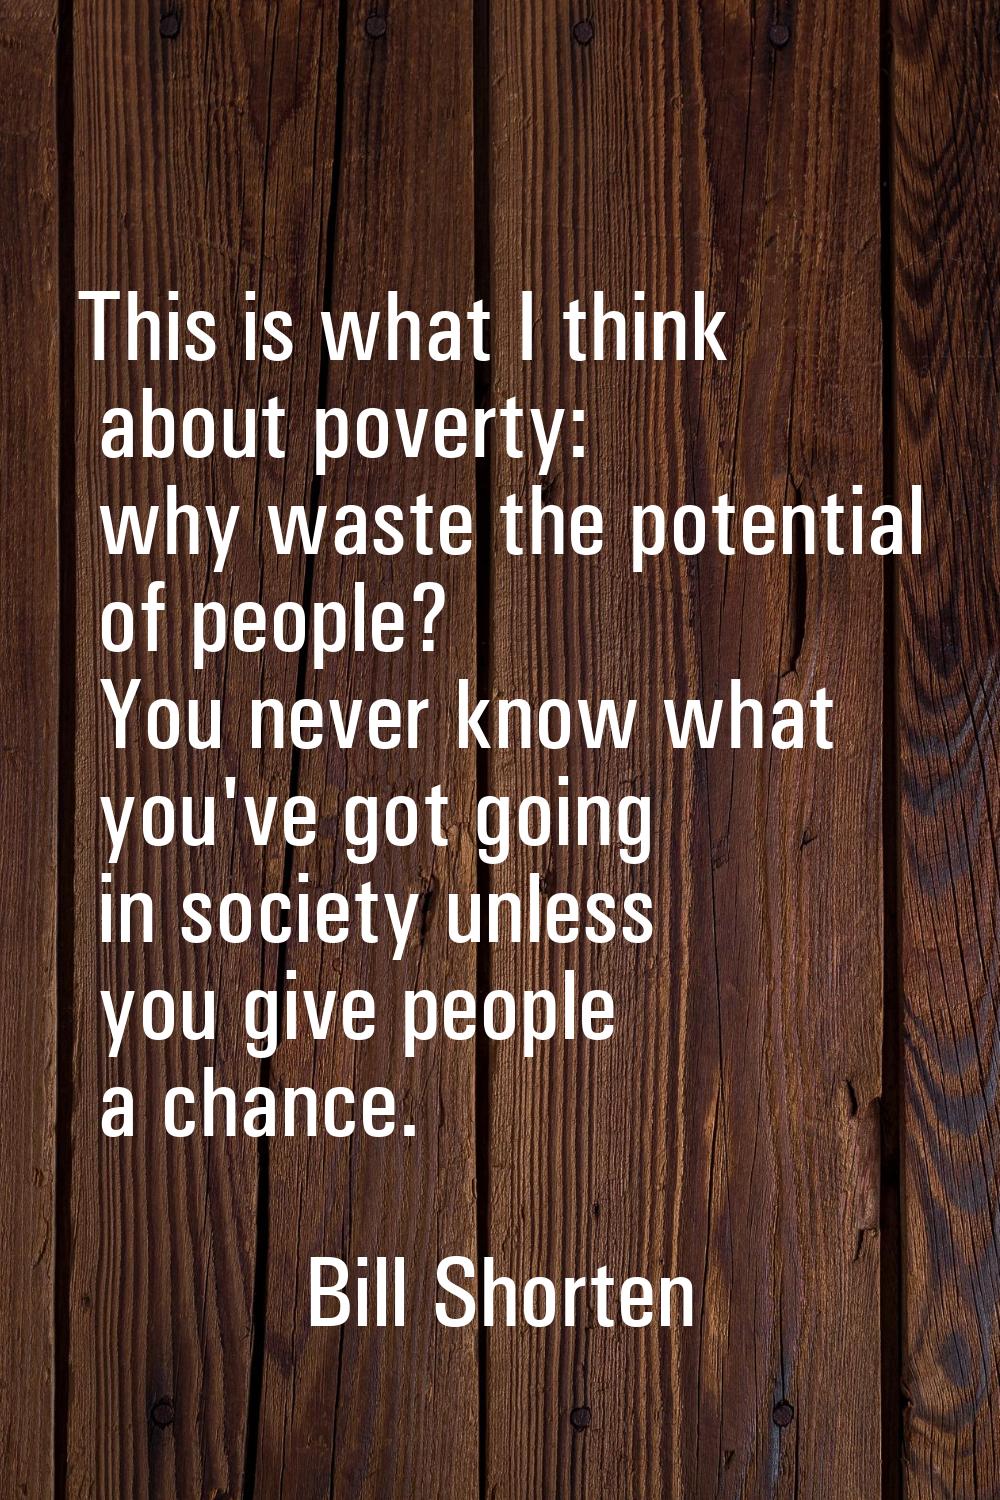 This is what I think about poverty: why waste the potential of people? You never know what you've g